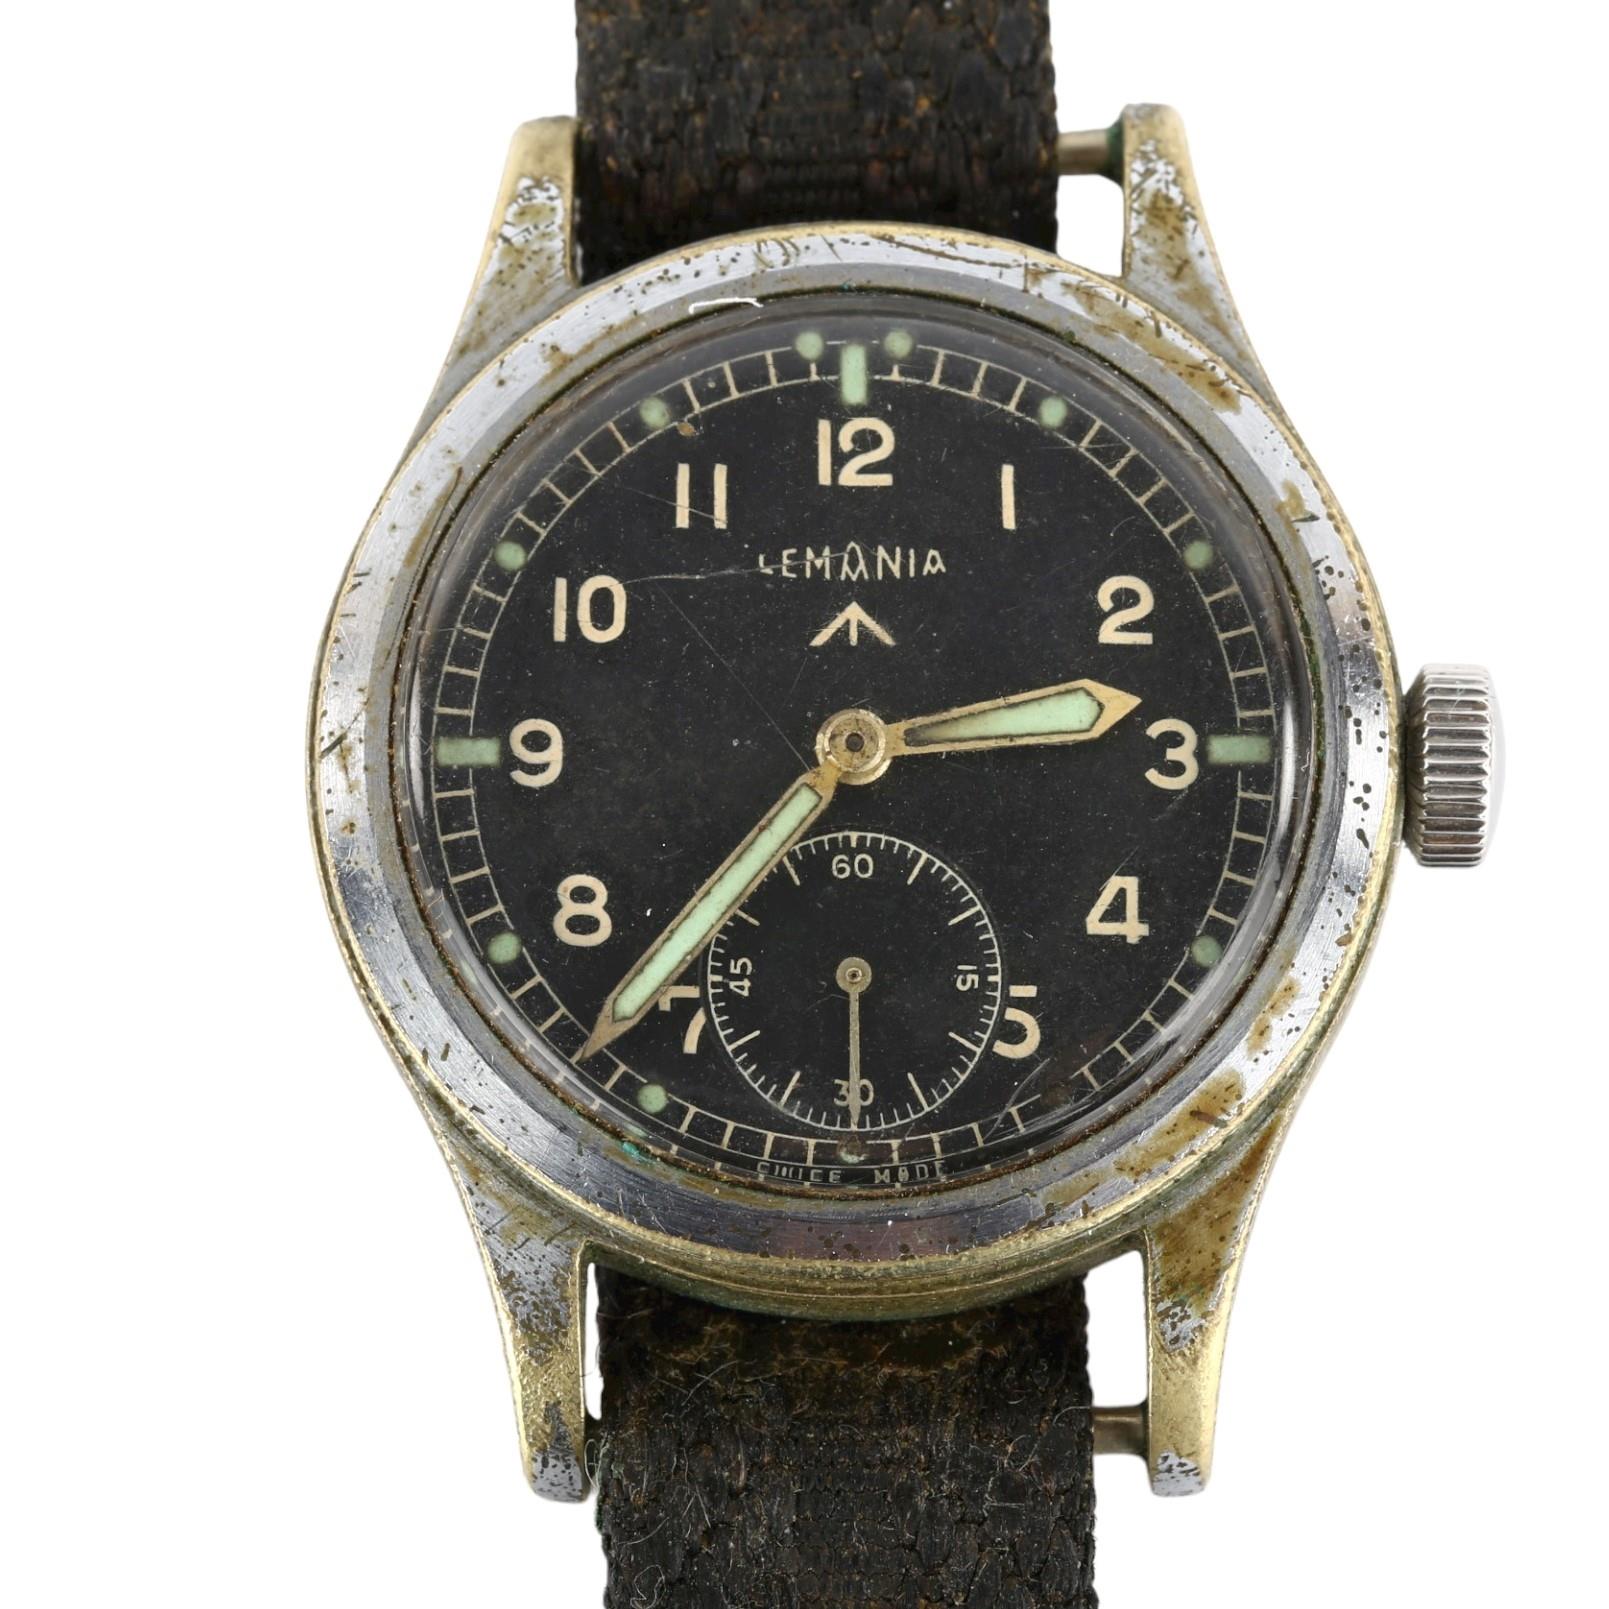 LEMANIA - A Second World War Period Military Issue chrome-plated 'Dirty Dozen' mechanical